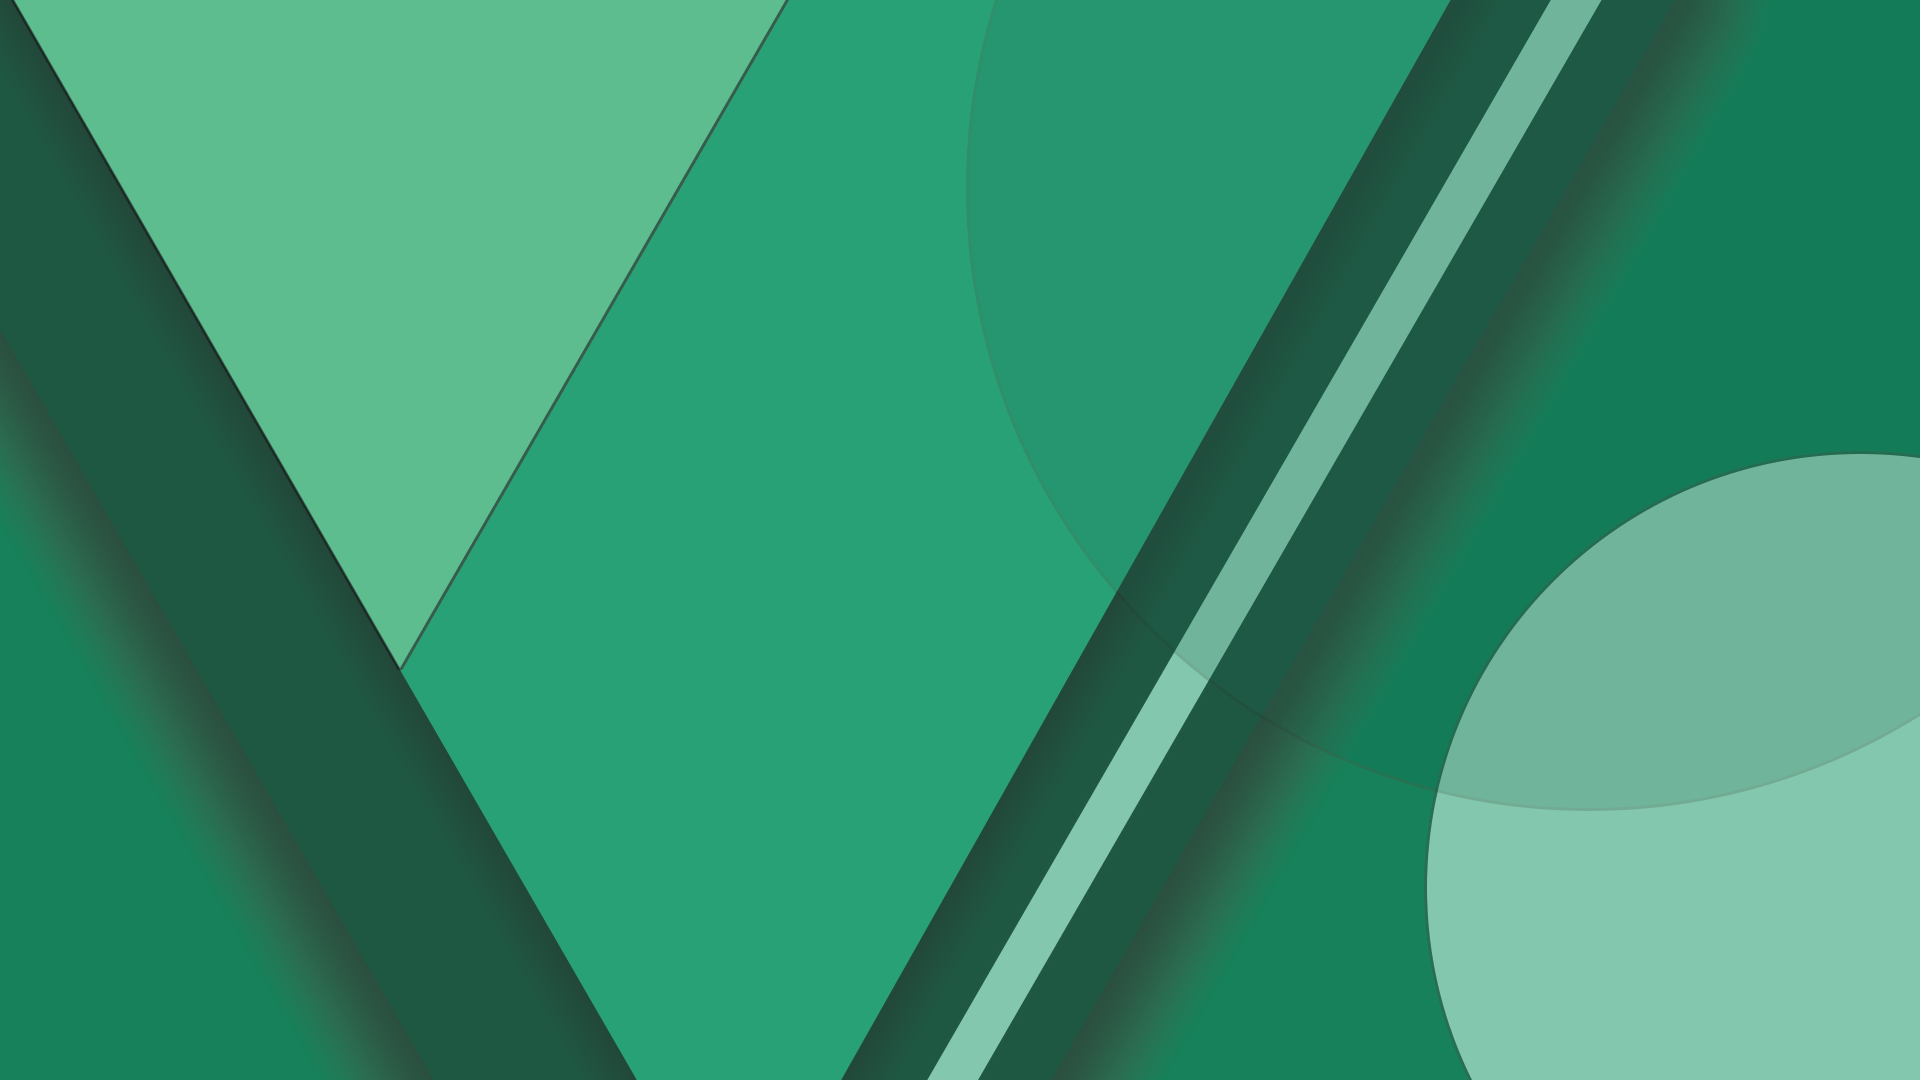 Awesome Wallpaper Inspired By Google&;s Material Design